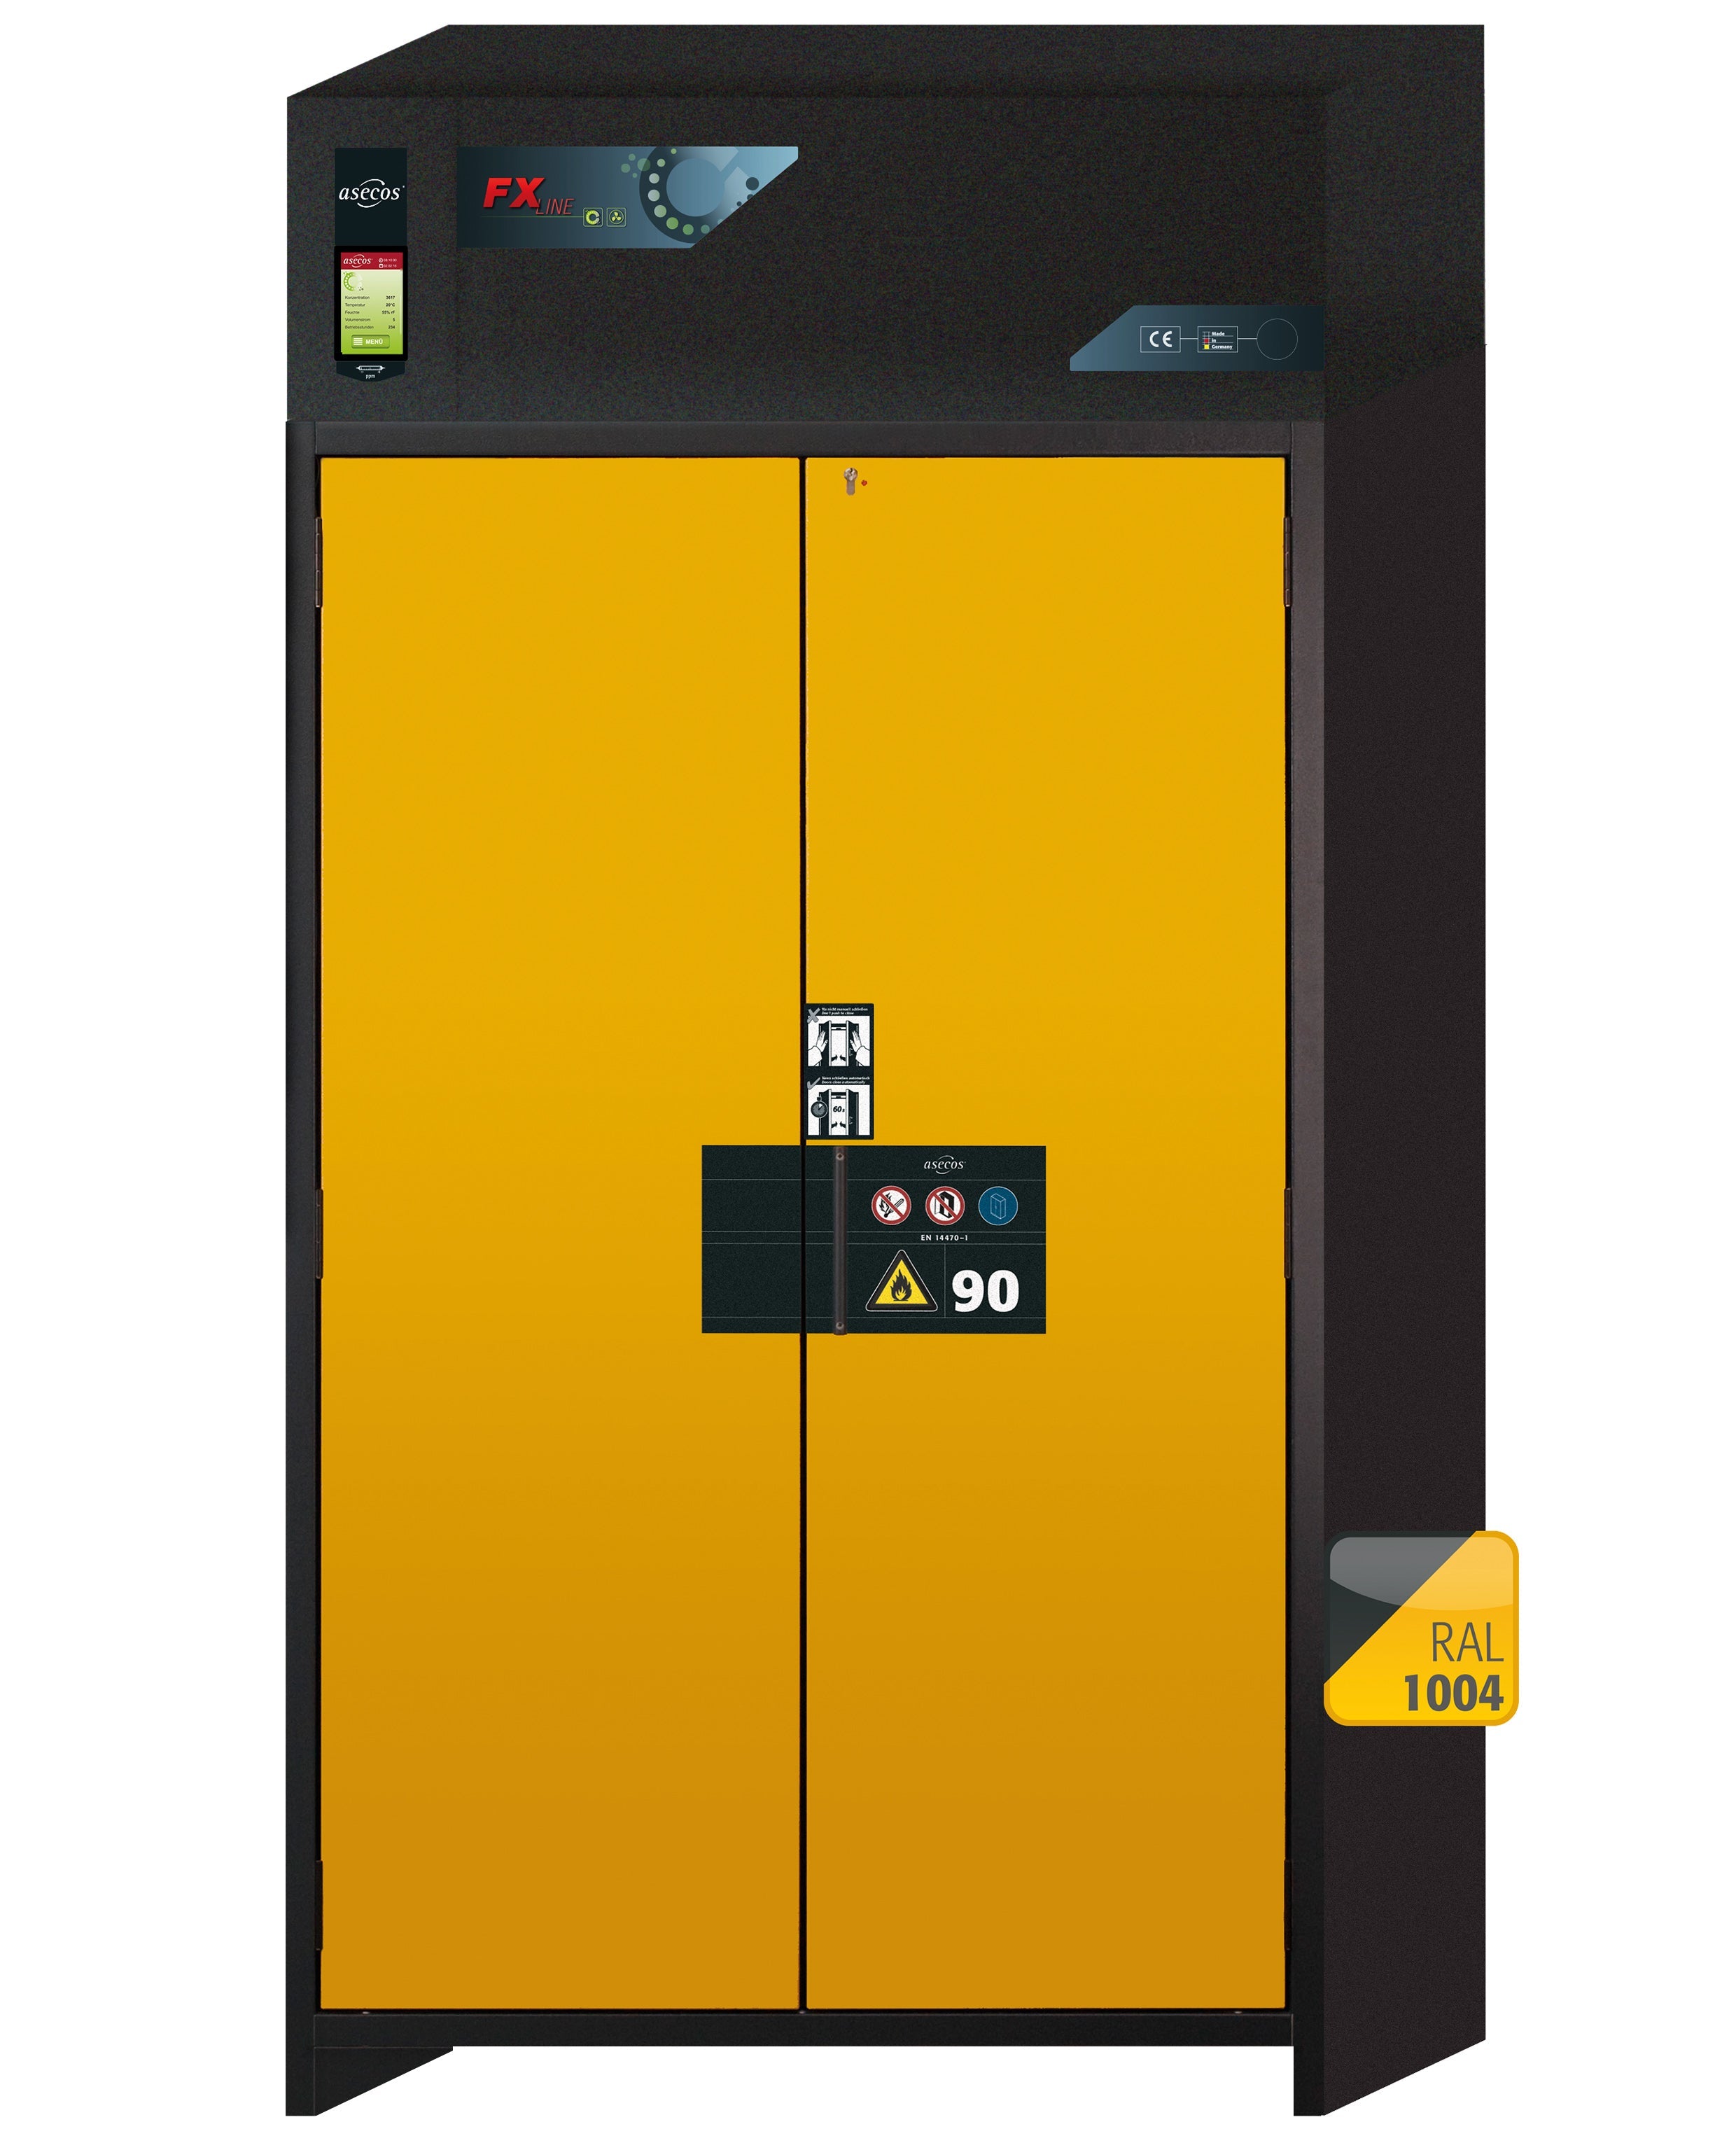 Type 90 recirculating air filter cabinet FX-PEGASUS-90 model FX90.229.120.WDAC in safety yellow RAL 1004 with 6x standard pull-out tray (stainless steel 1.4301)